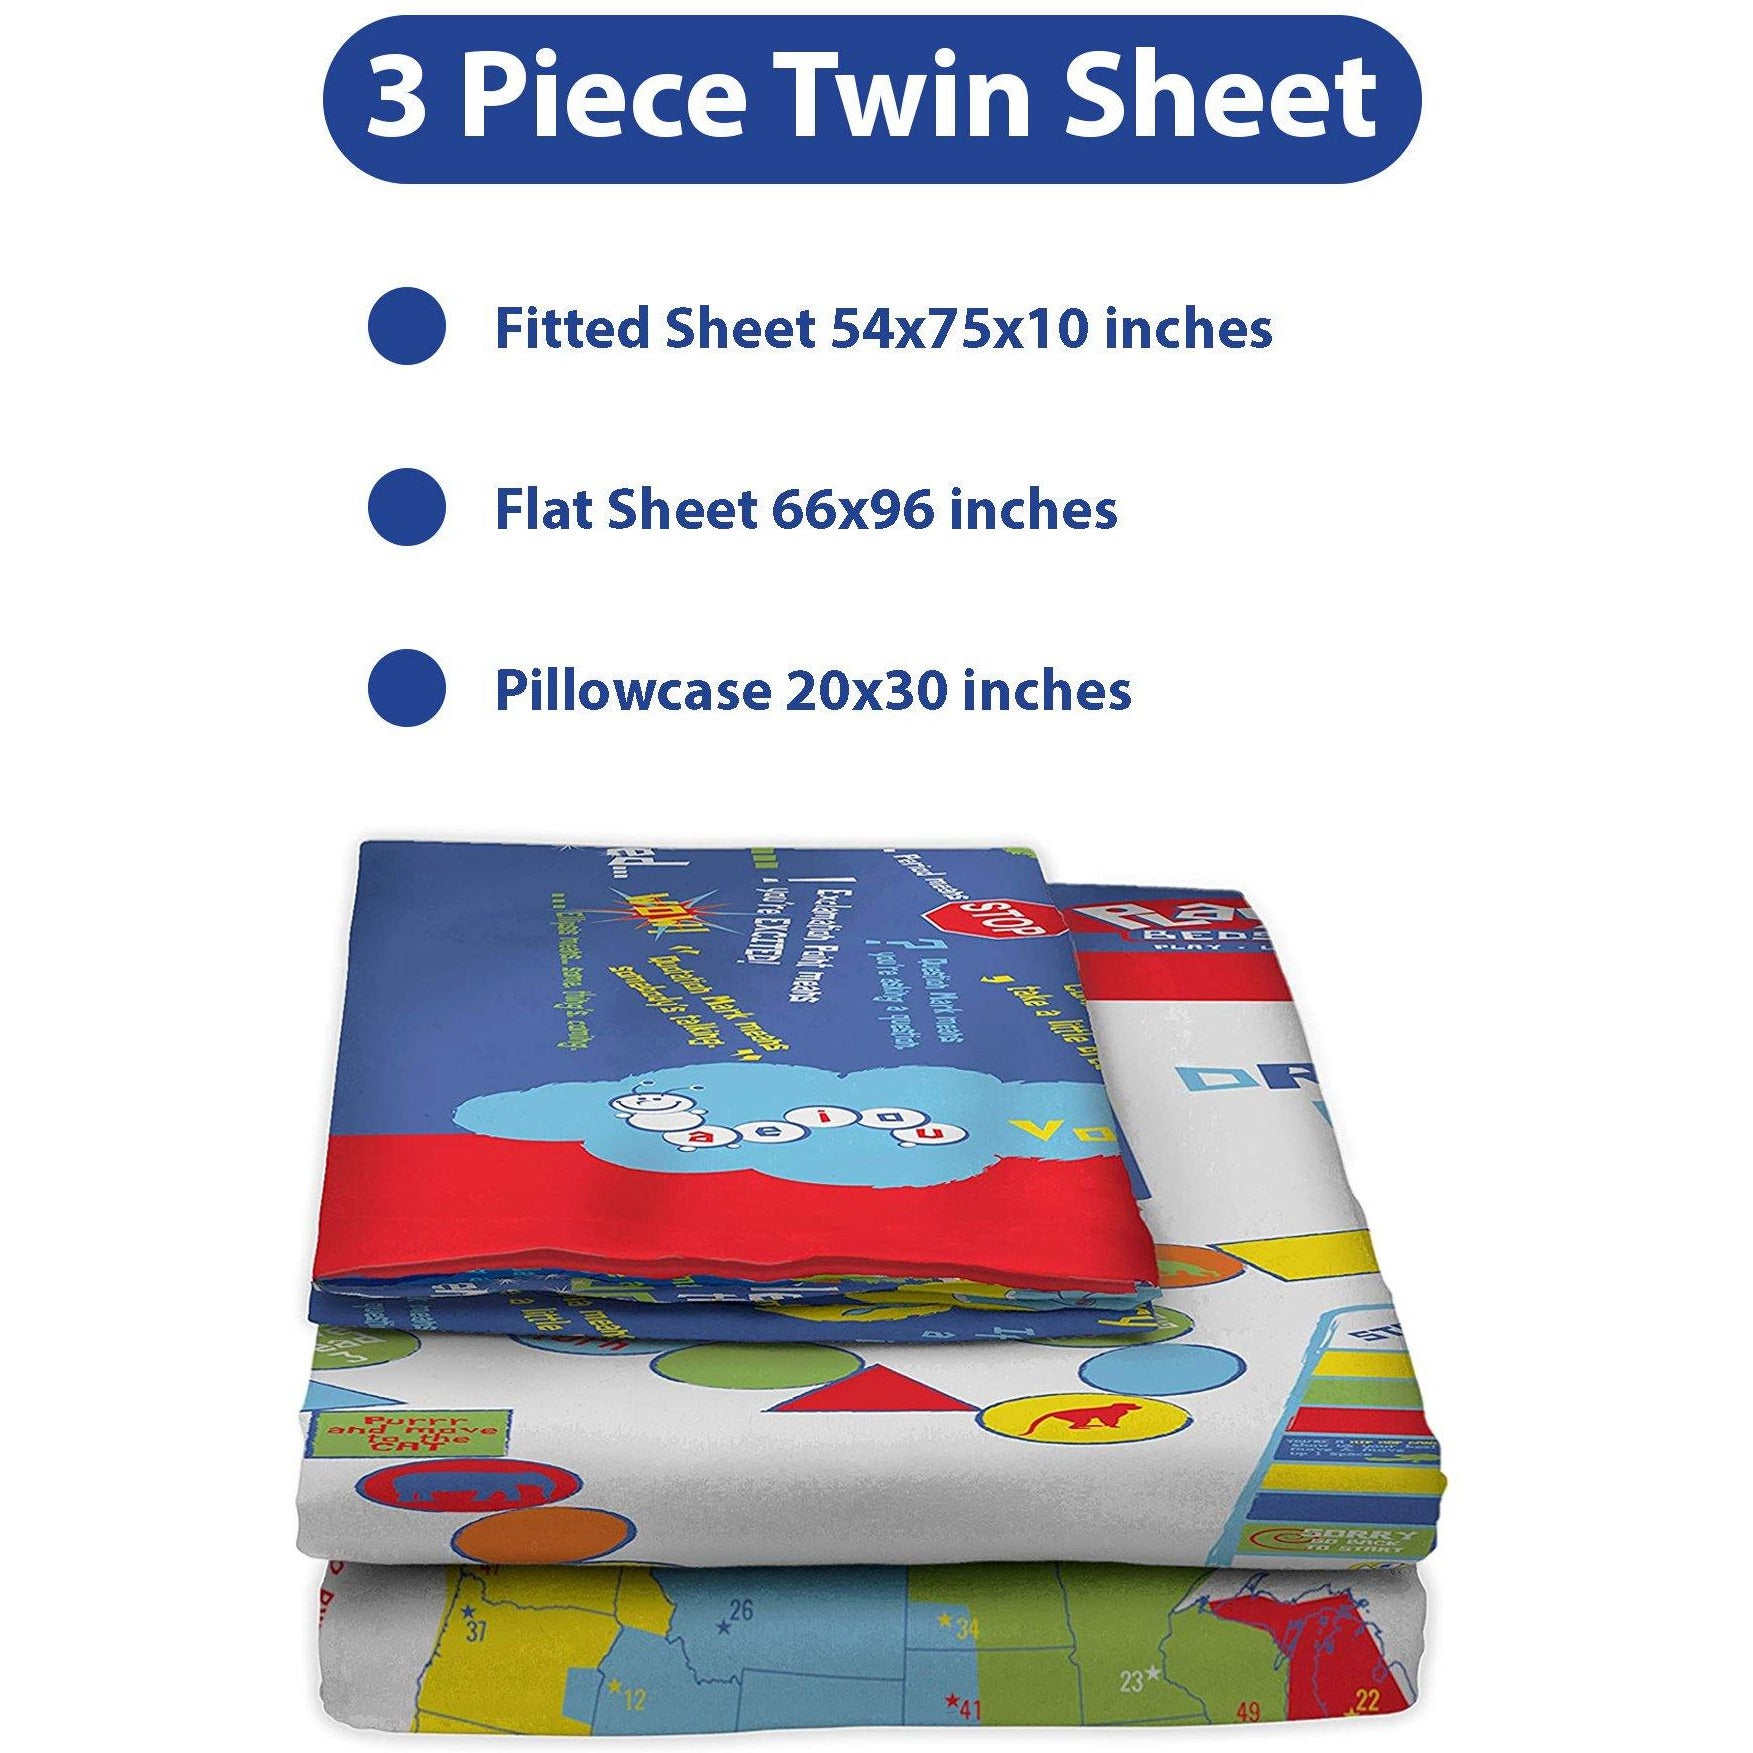 Playtime Bed Sheets Twin Set! Over 50 Fun Interactive Games & Puzzles. Ultra Soft Microfiber 3-Piece Set (Blue). - Playtime Bed Sheets and Slumber Bags